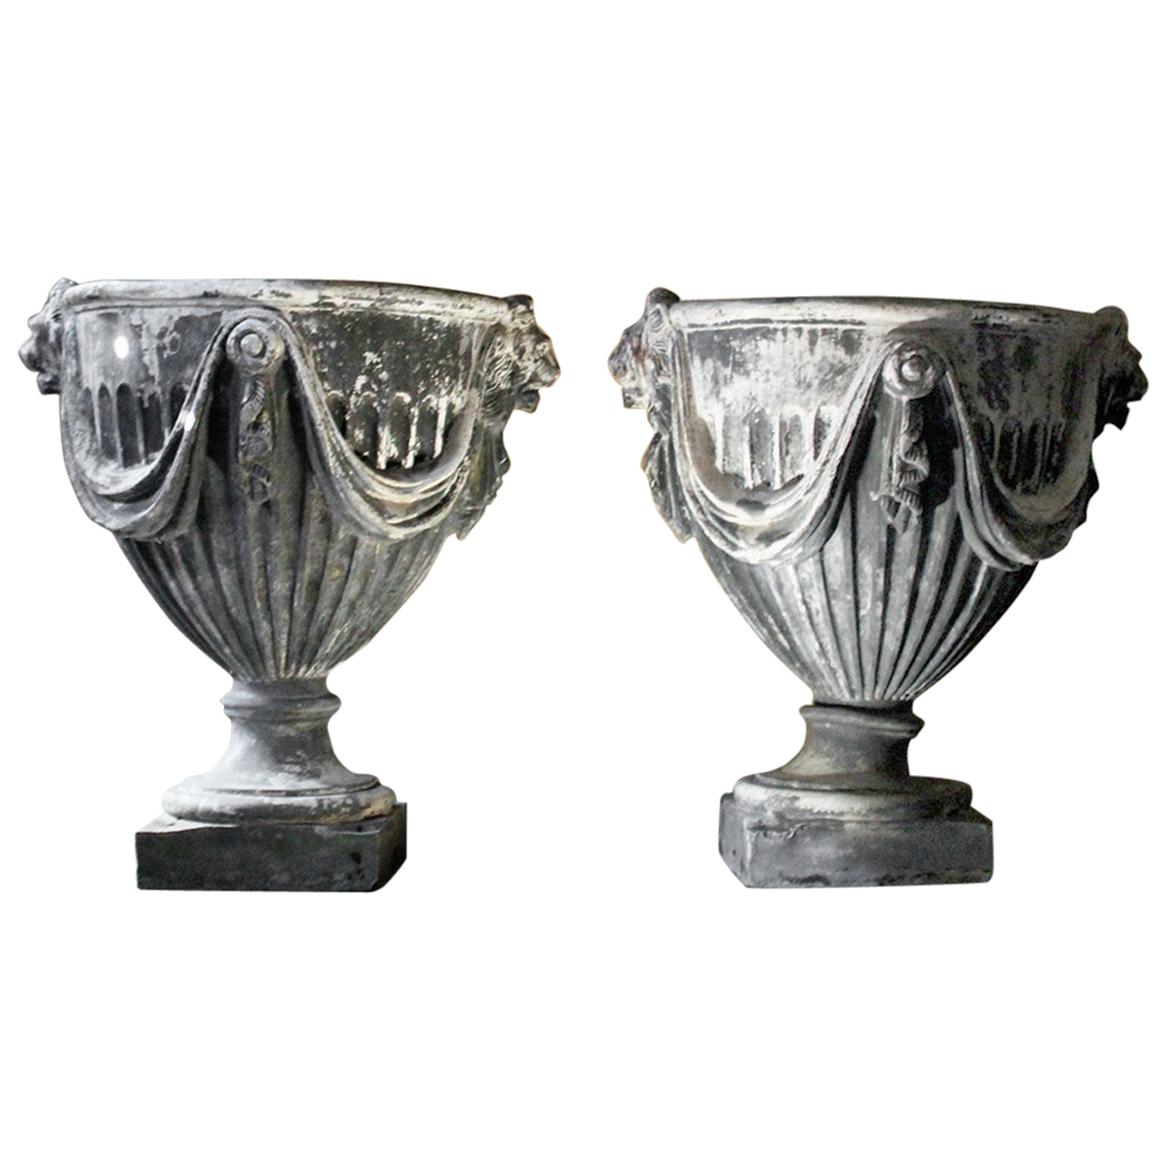 Pair of 20th Century Neoclassical Revival Lead Garden Urns